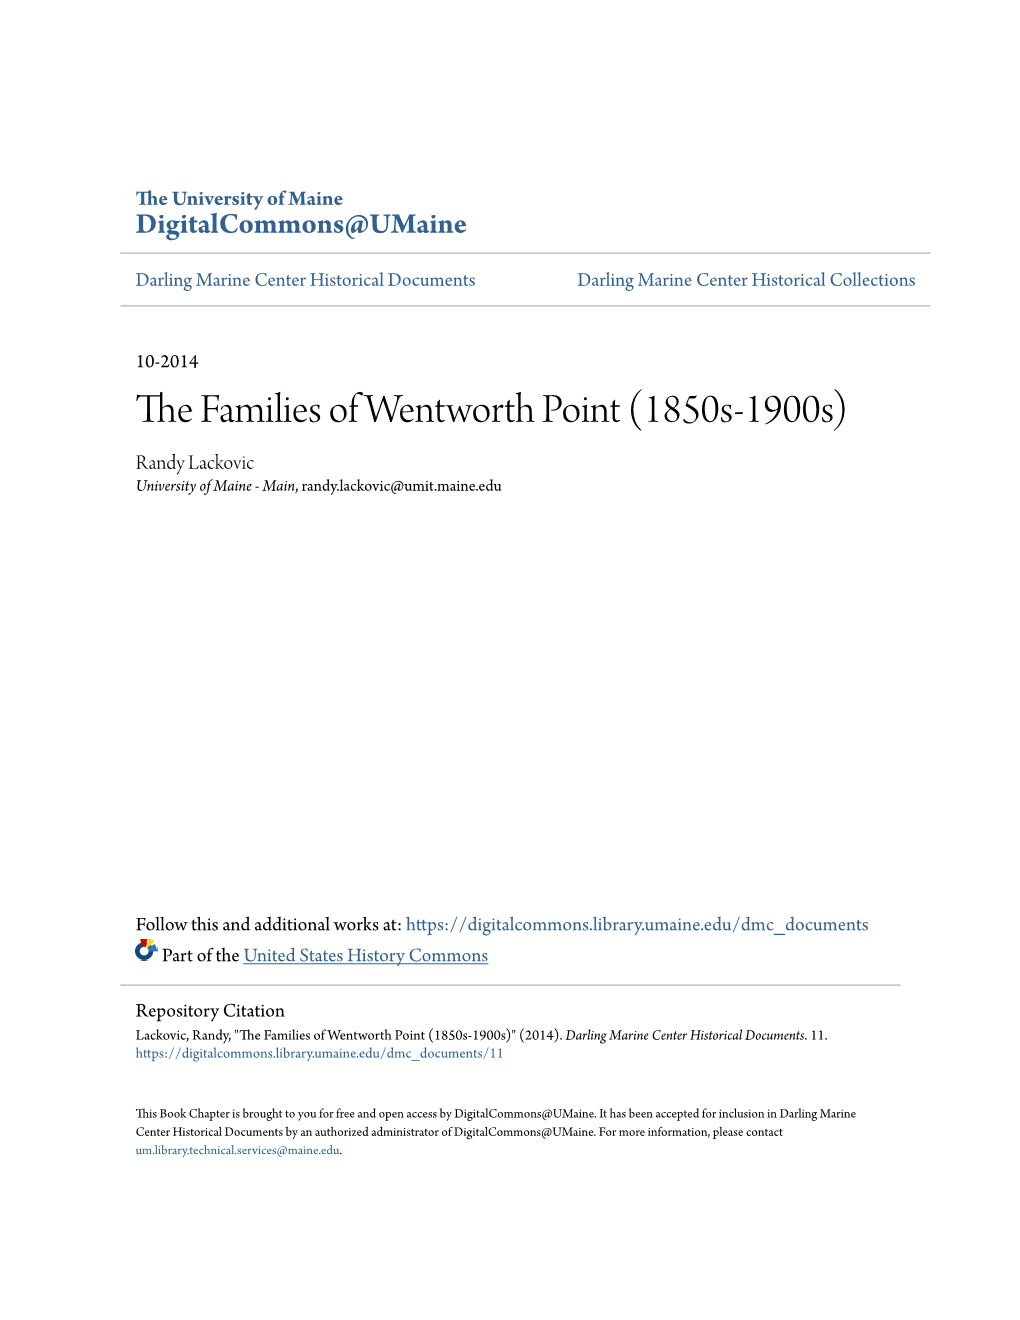 The Families of Wentworth Point (1850S-1900S)